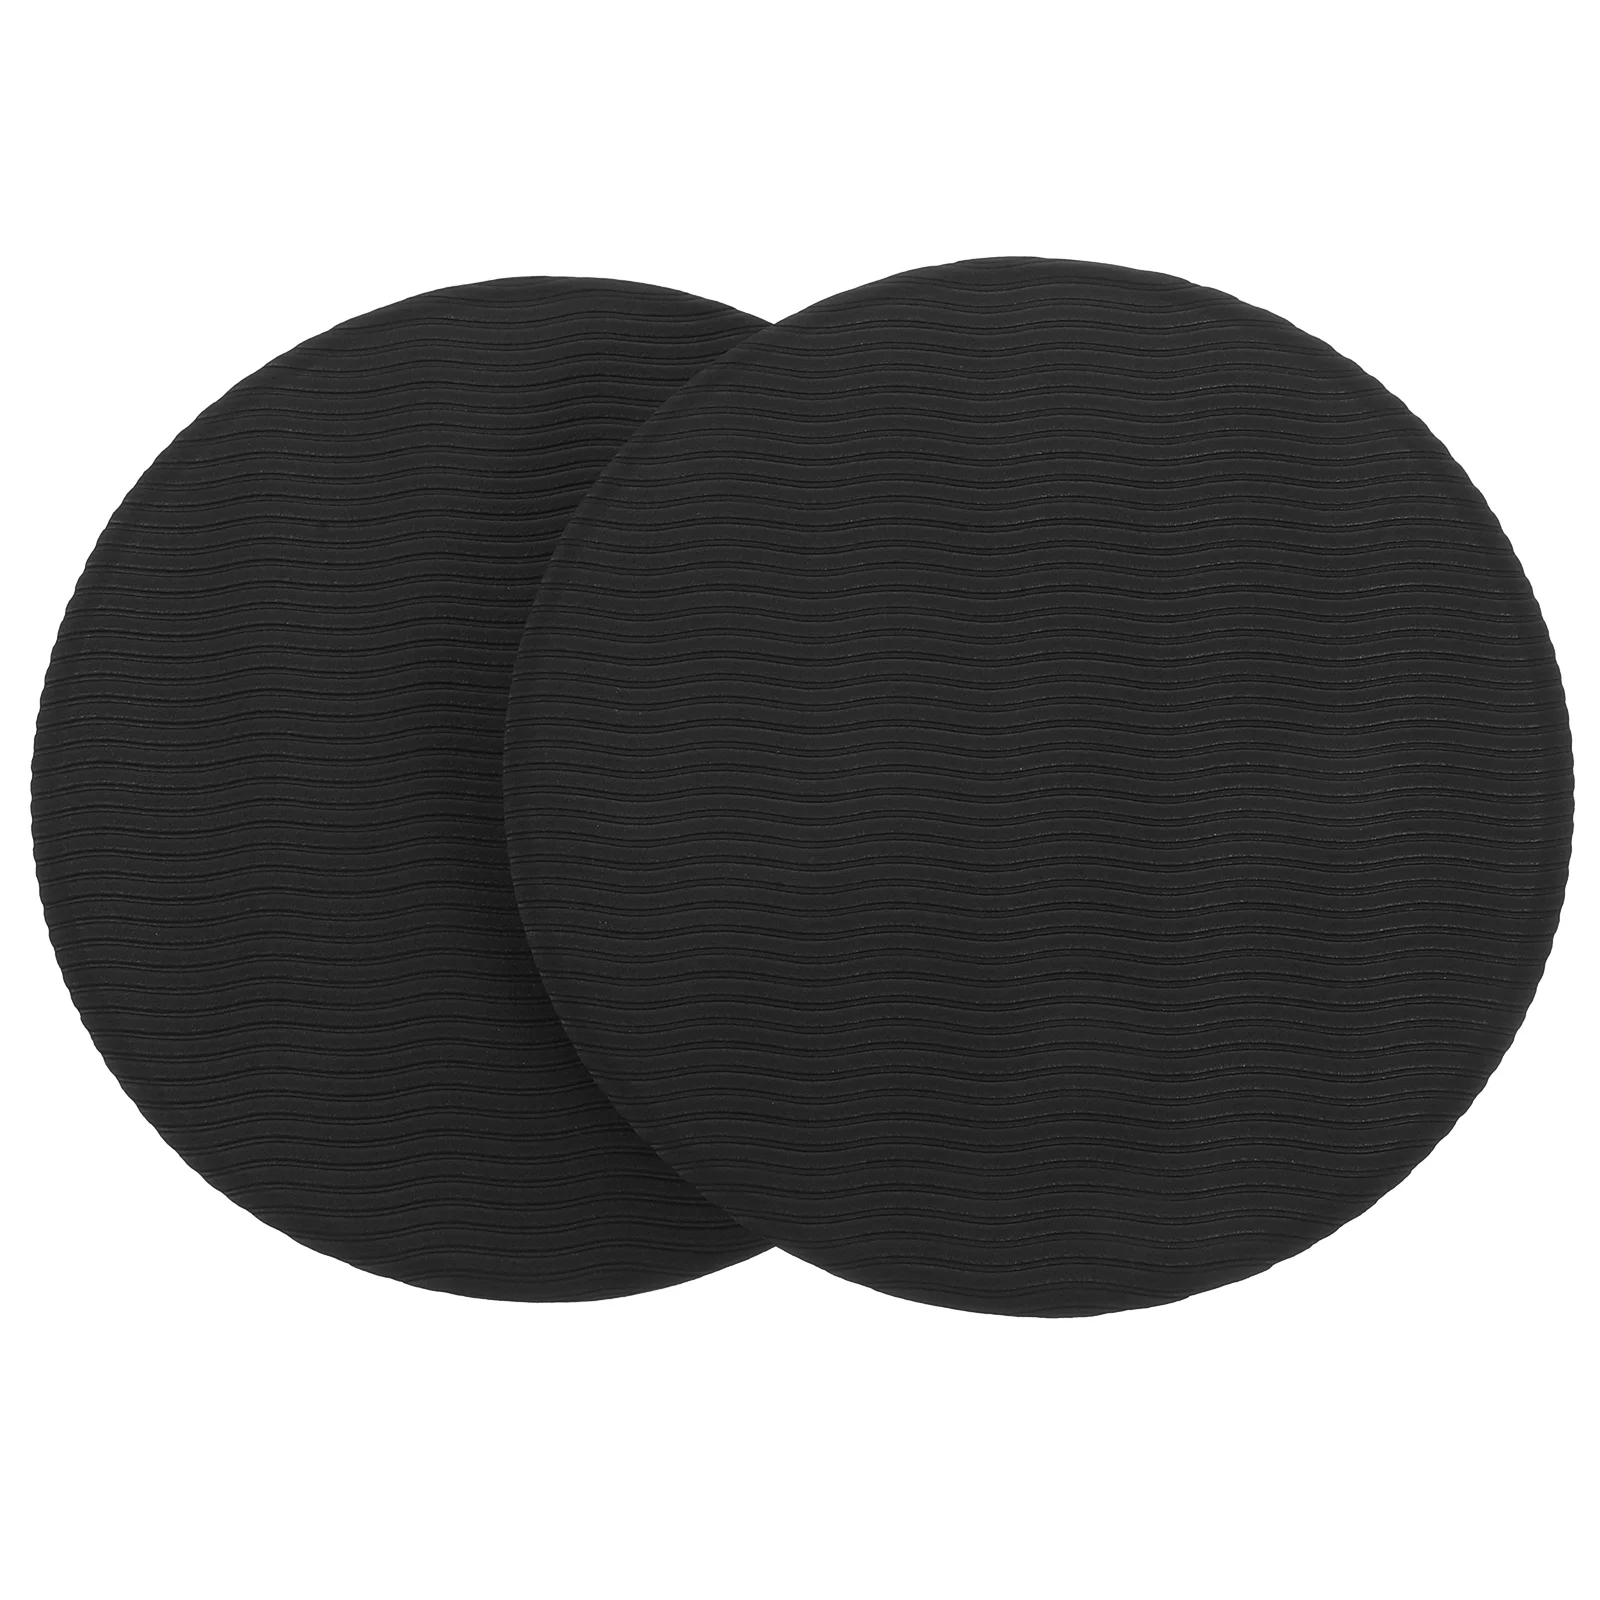 

2pcs Yoga Workout Knee Pad Cushion Thick Round Eco TPE Yoga Pad Comfort Yoga Pilates Workout Support Pad for Hands Wrists Mat